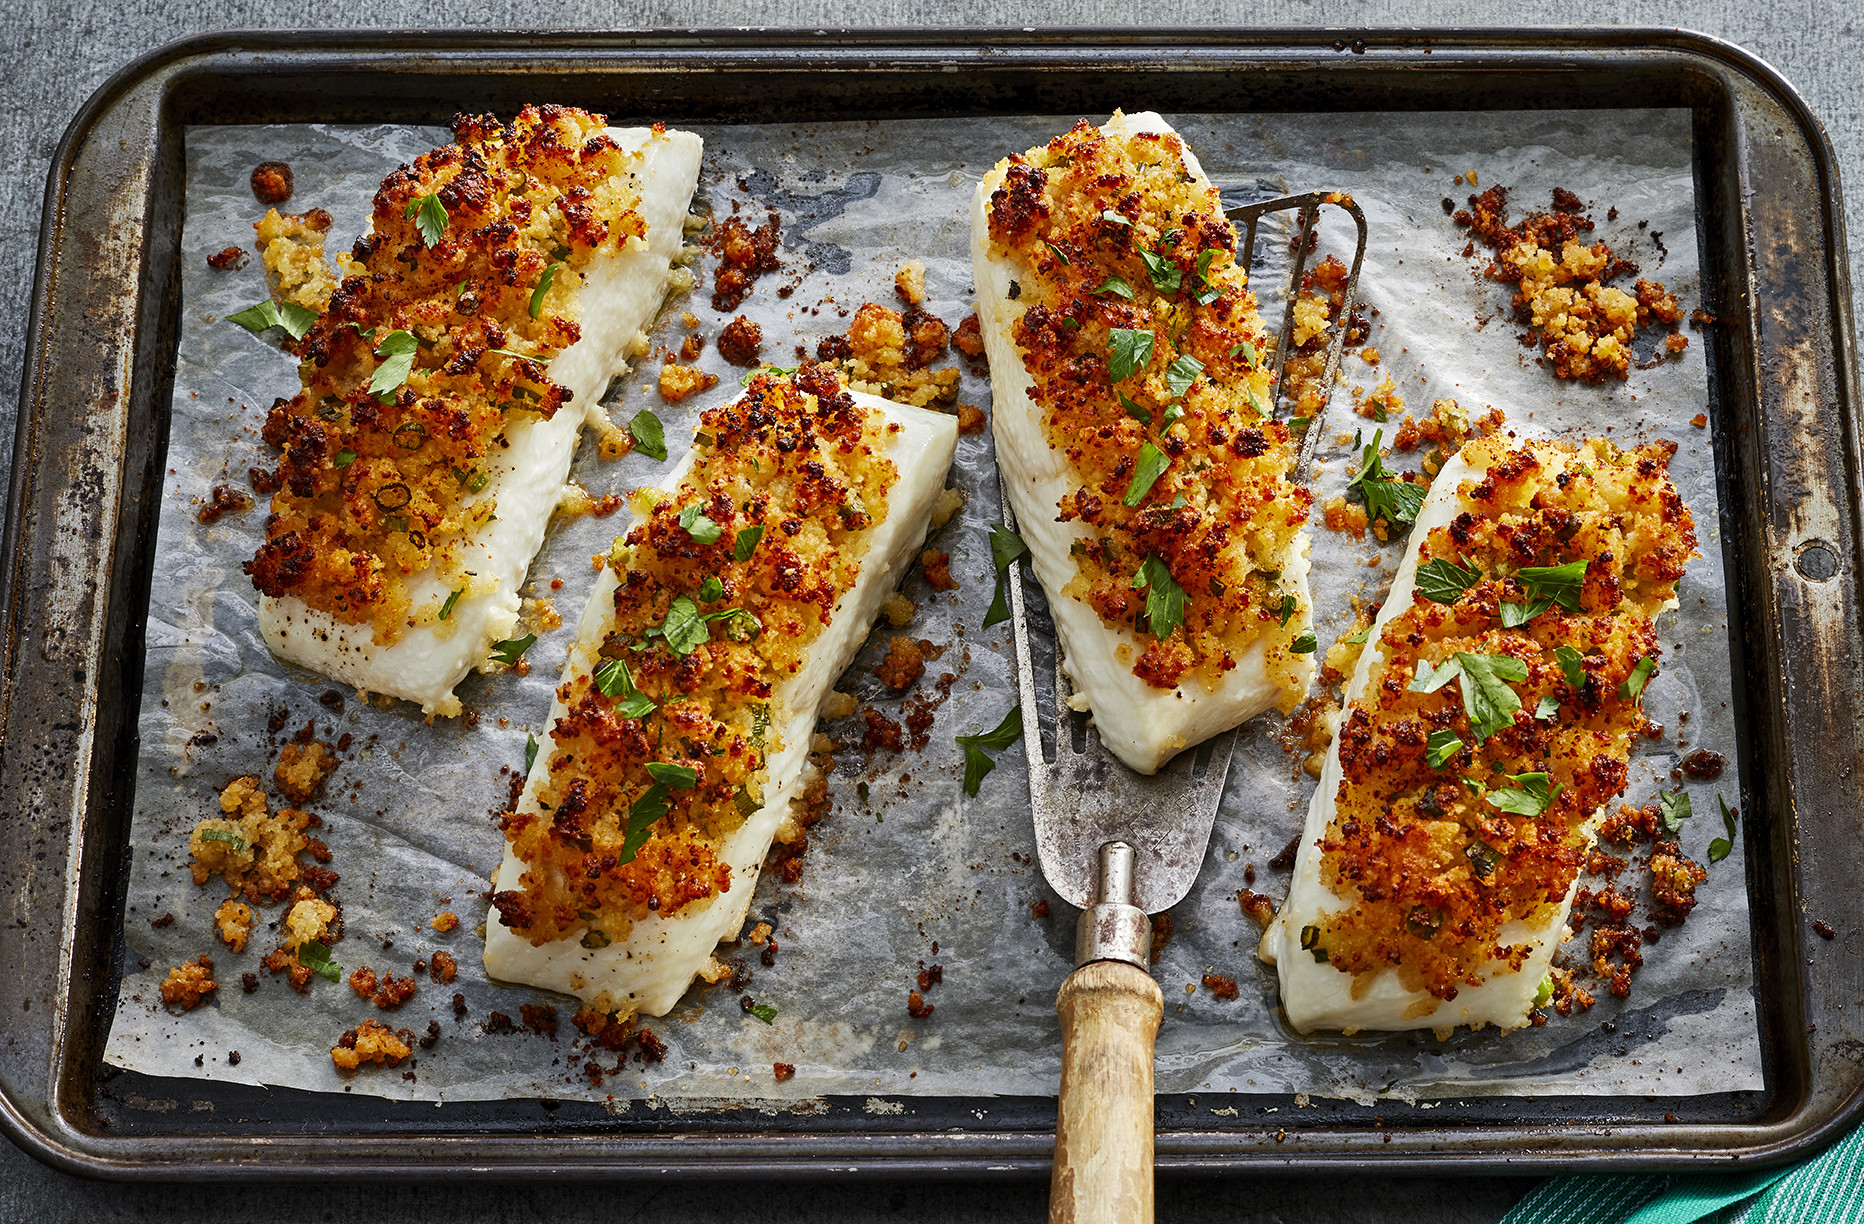 Recipes For Baked Fish Fillets
 Parmesan Crusted Baked Fish